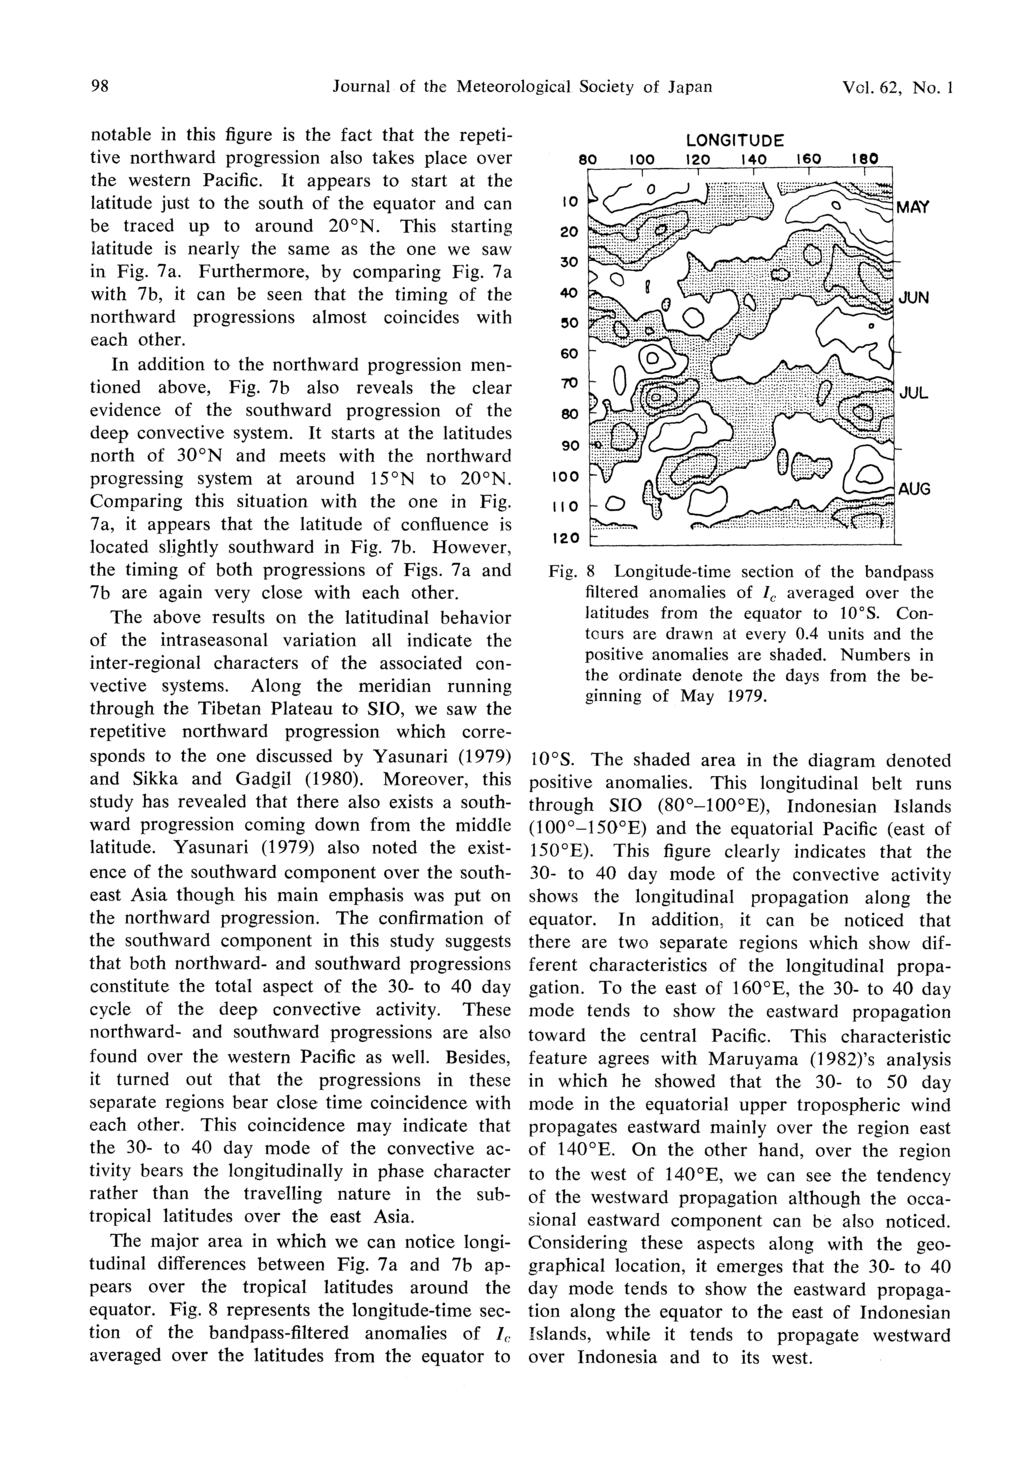 98 Journal of the Meteorological. Society of Japan Vol. 62, No. 1 notable in this figure is the fact that the repetitive northward progression also takes place over the western Pacific.